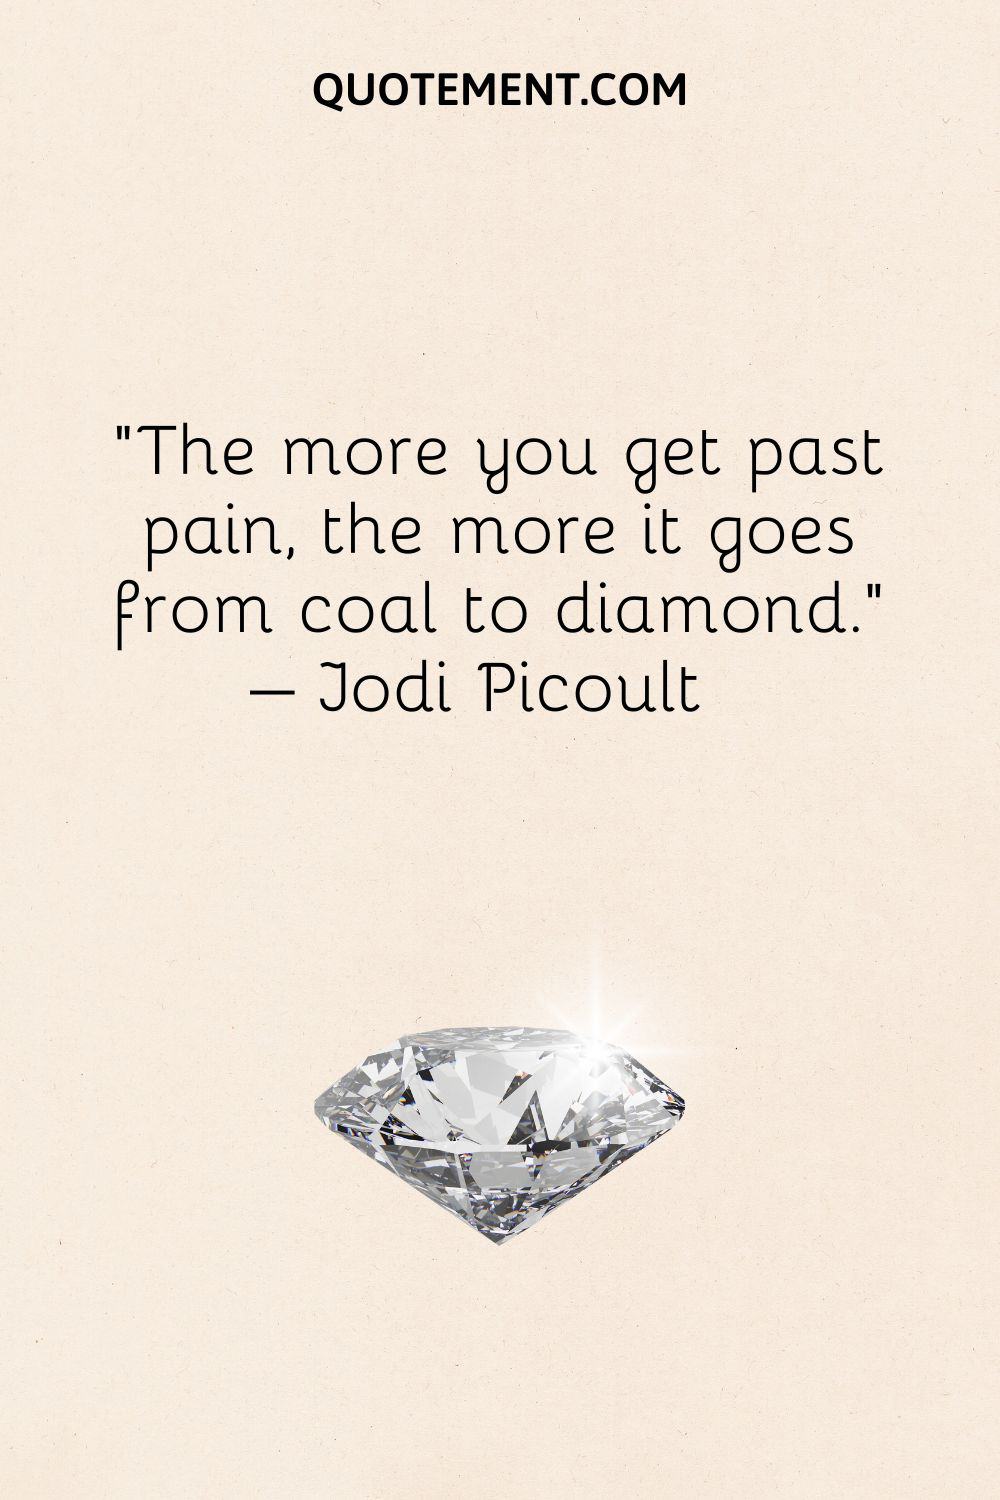 The more you get past pain, the more it goes from coal to diamond.